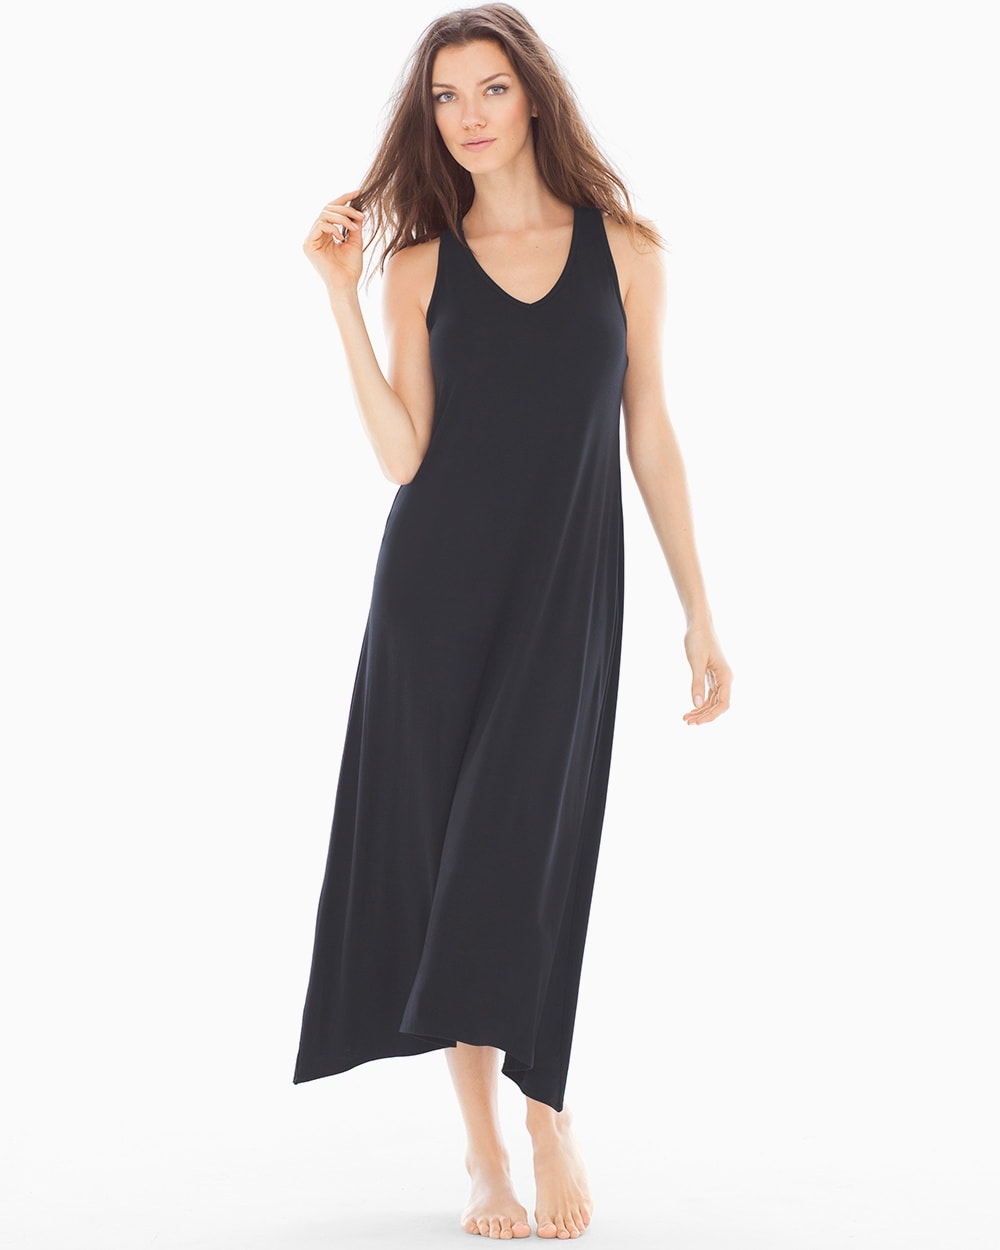 Embraceable Cool Nights Tea Length Nightgown Black